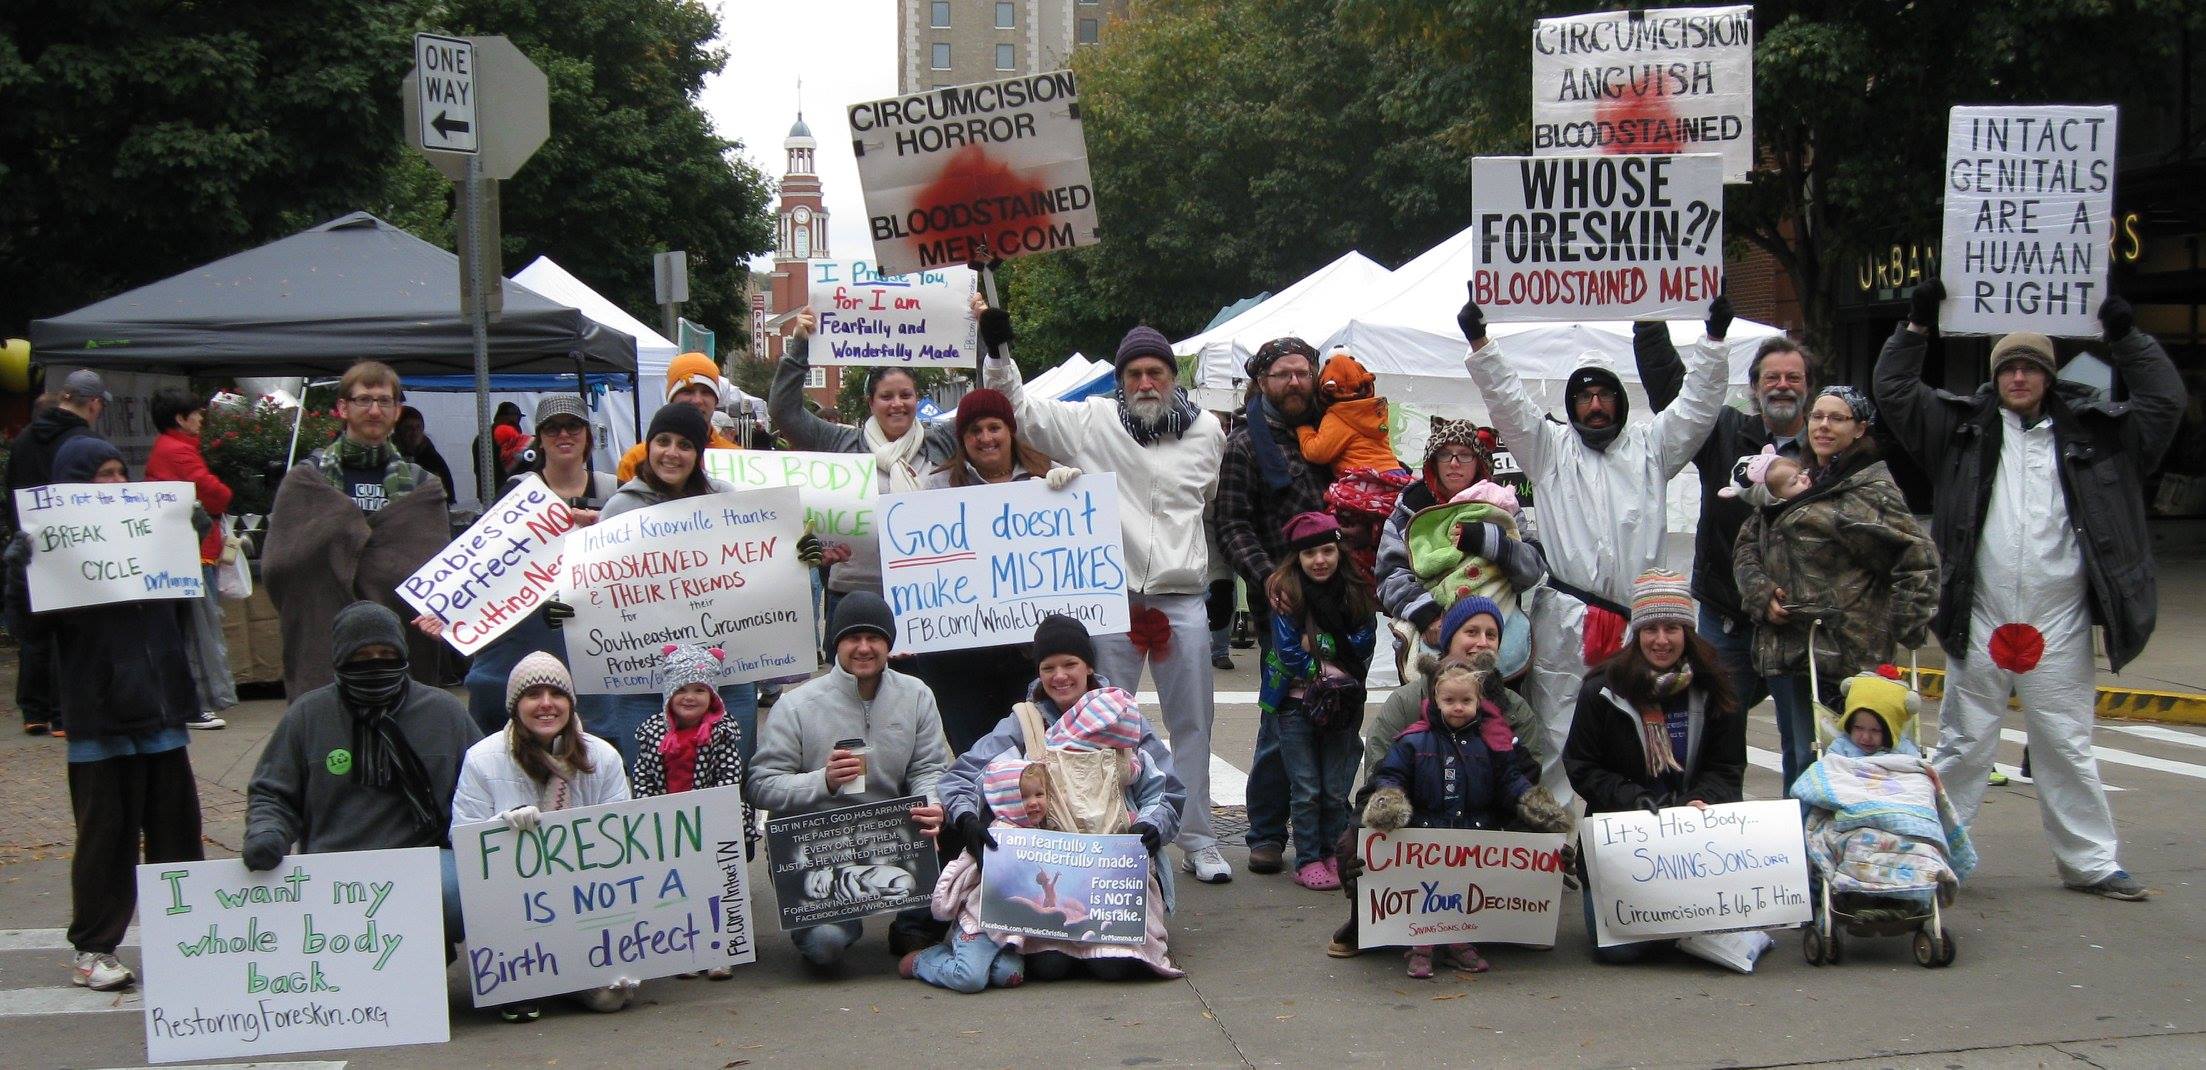 The first group shot of intactivists protesting against male infant circumcision